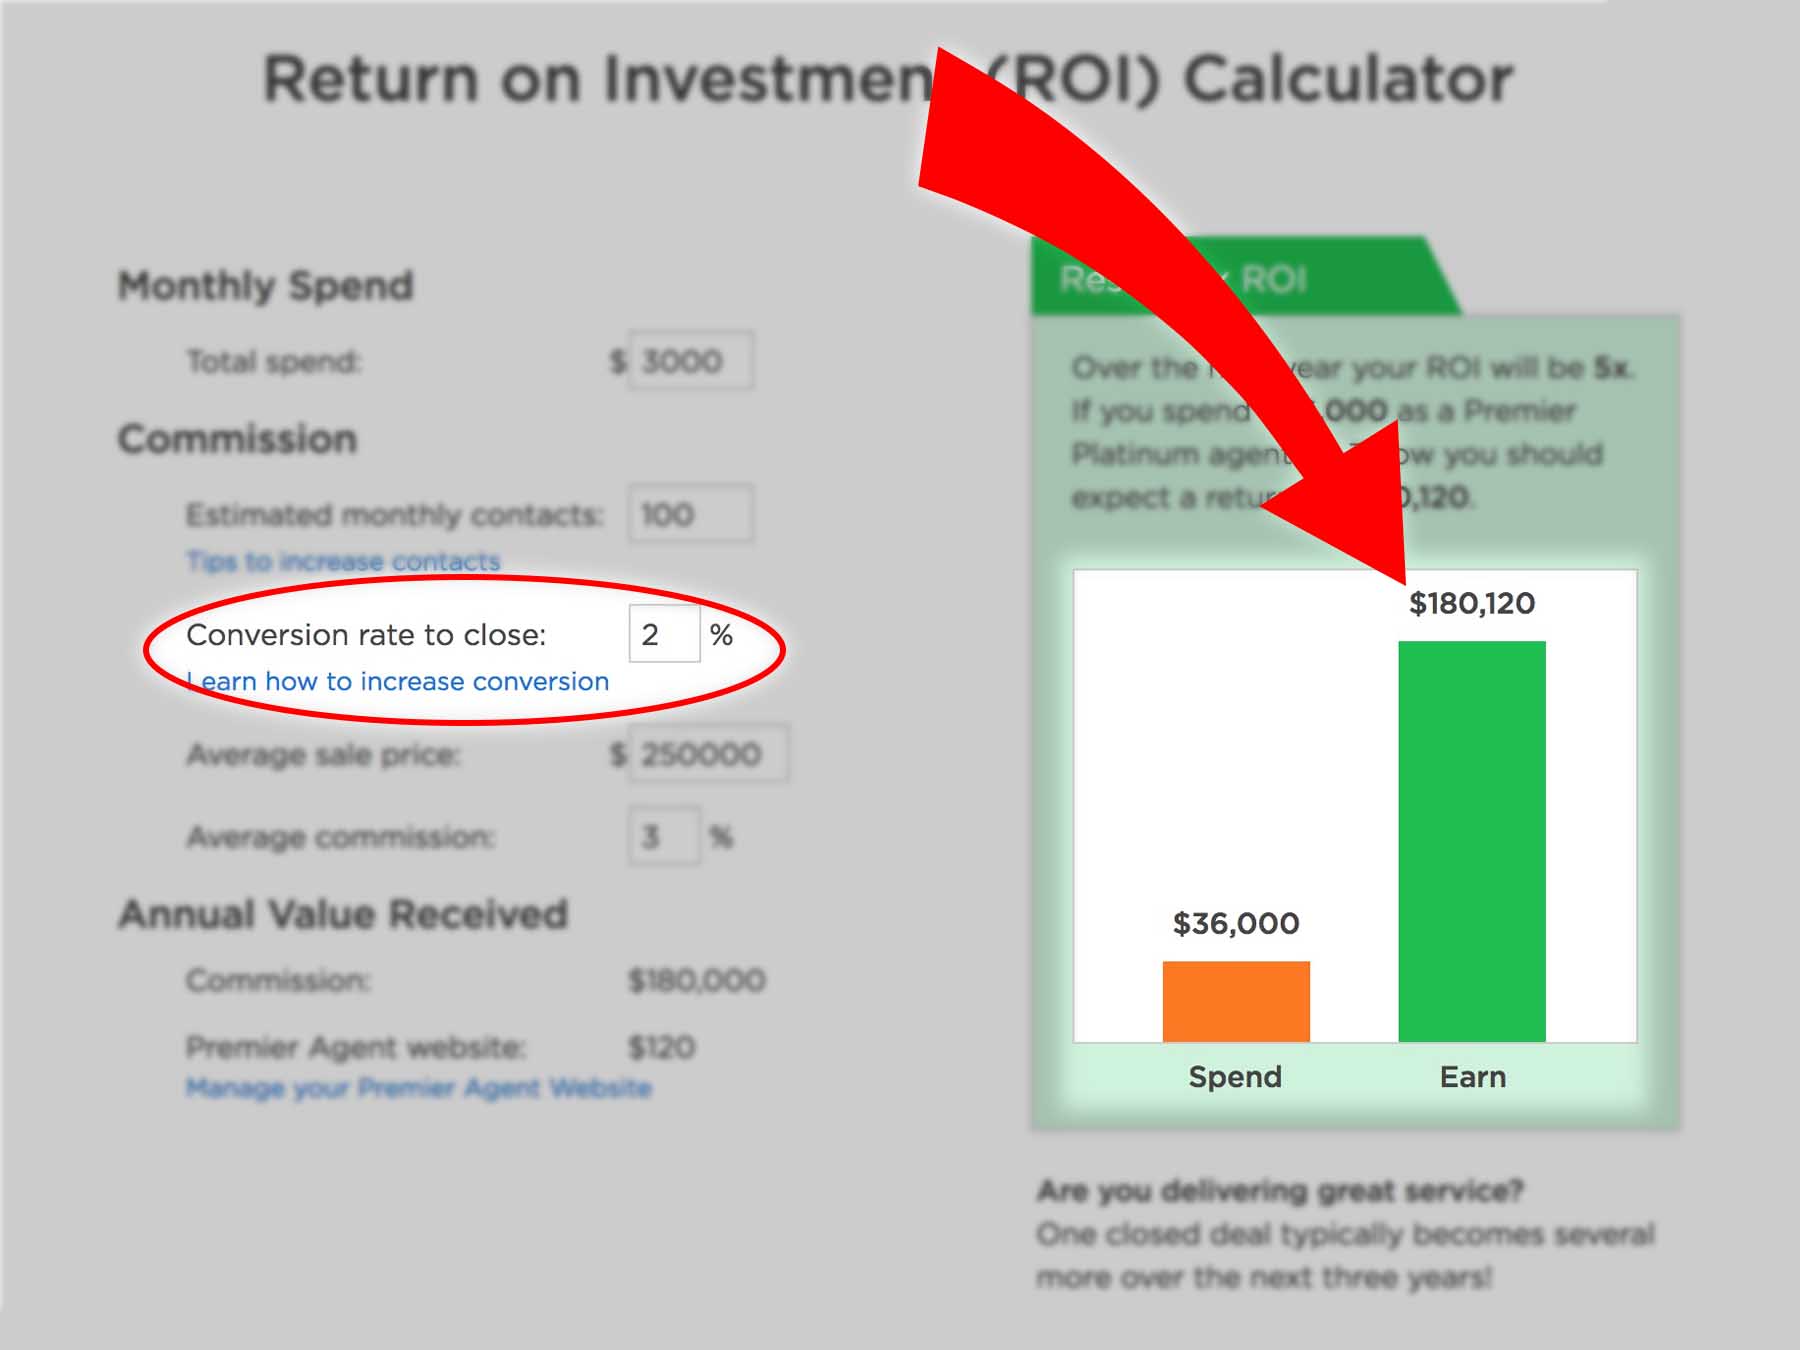 Real Estate Agent ROI Calculator (Zillow) with improved conversion rate.